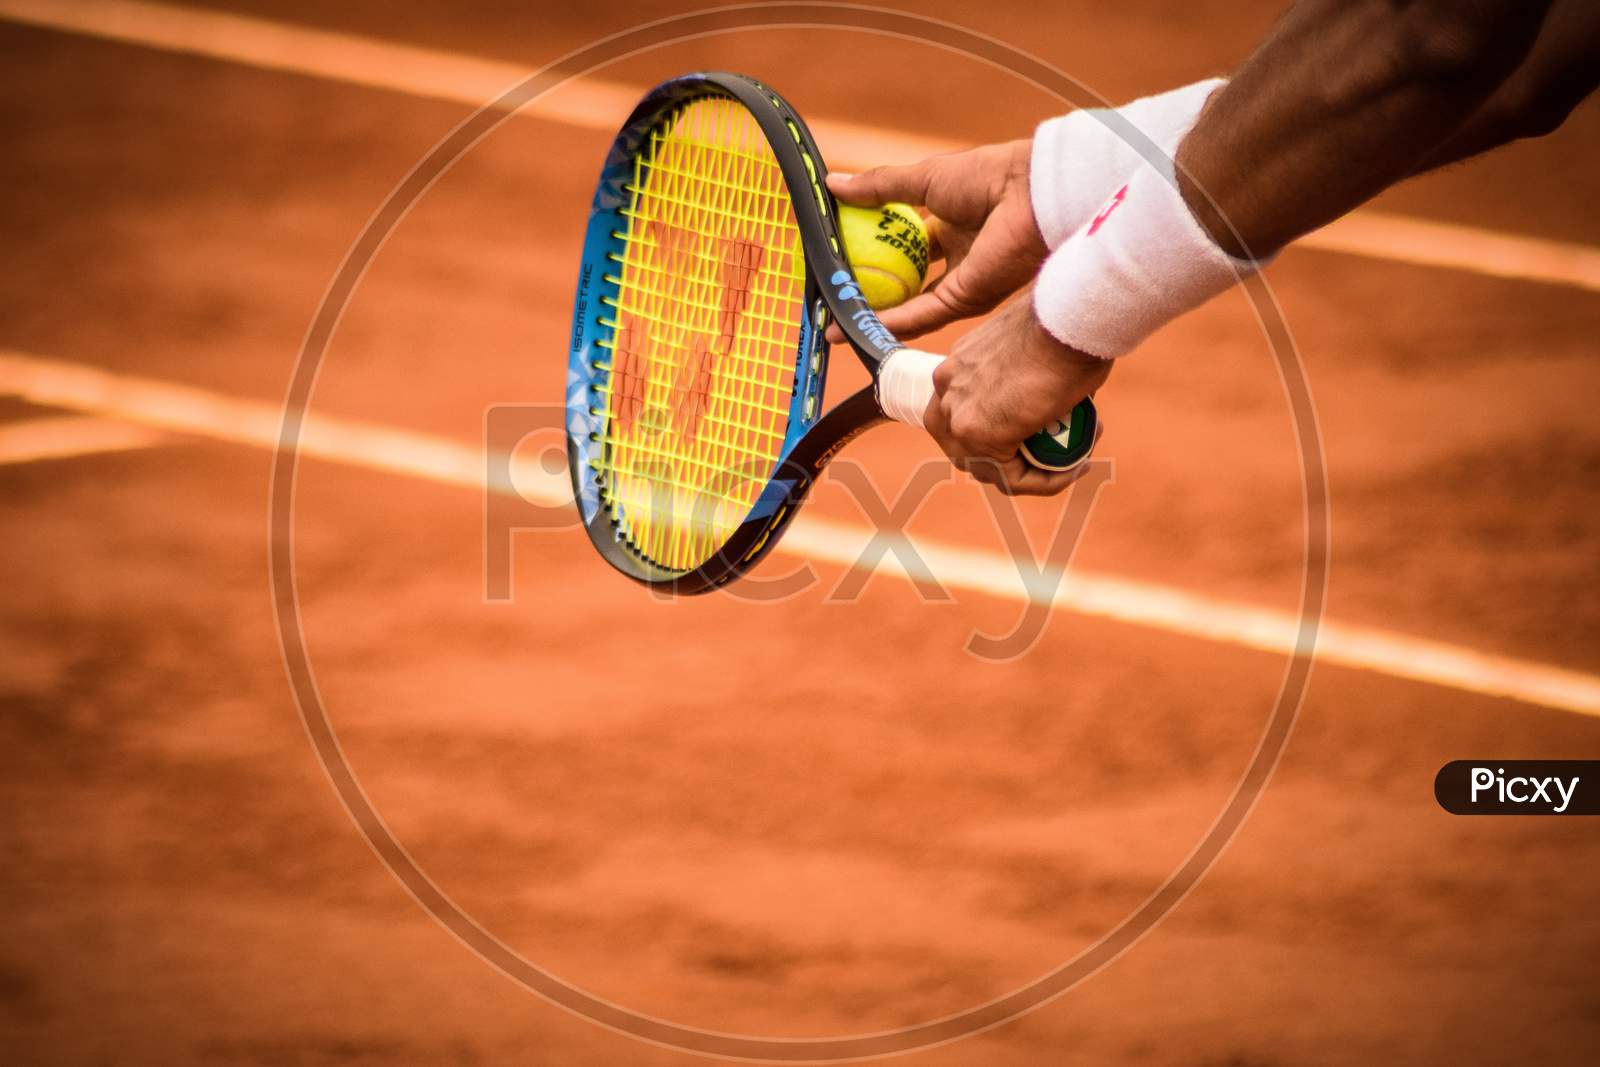 Close-up Photo of Person Holding Tennis Racket and Ball.